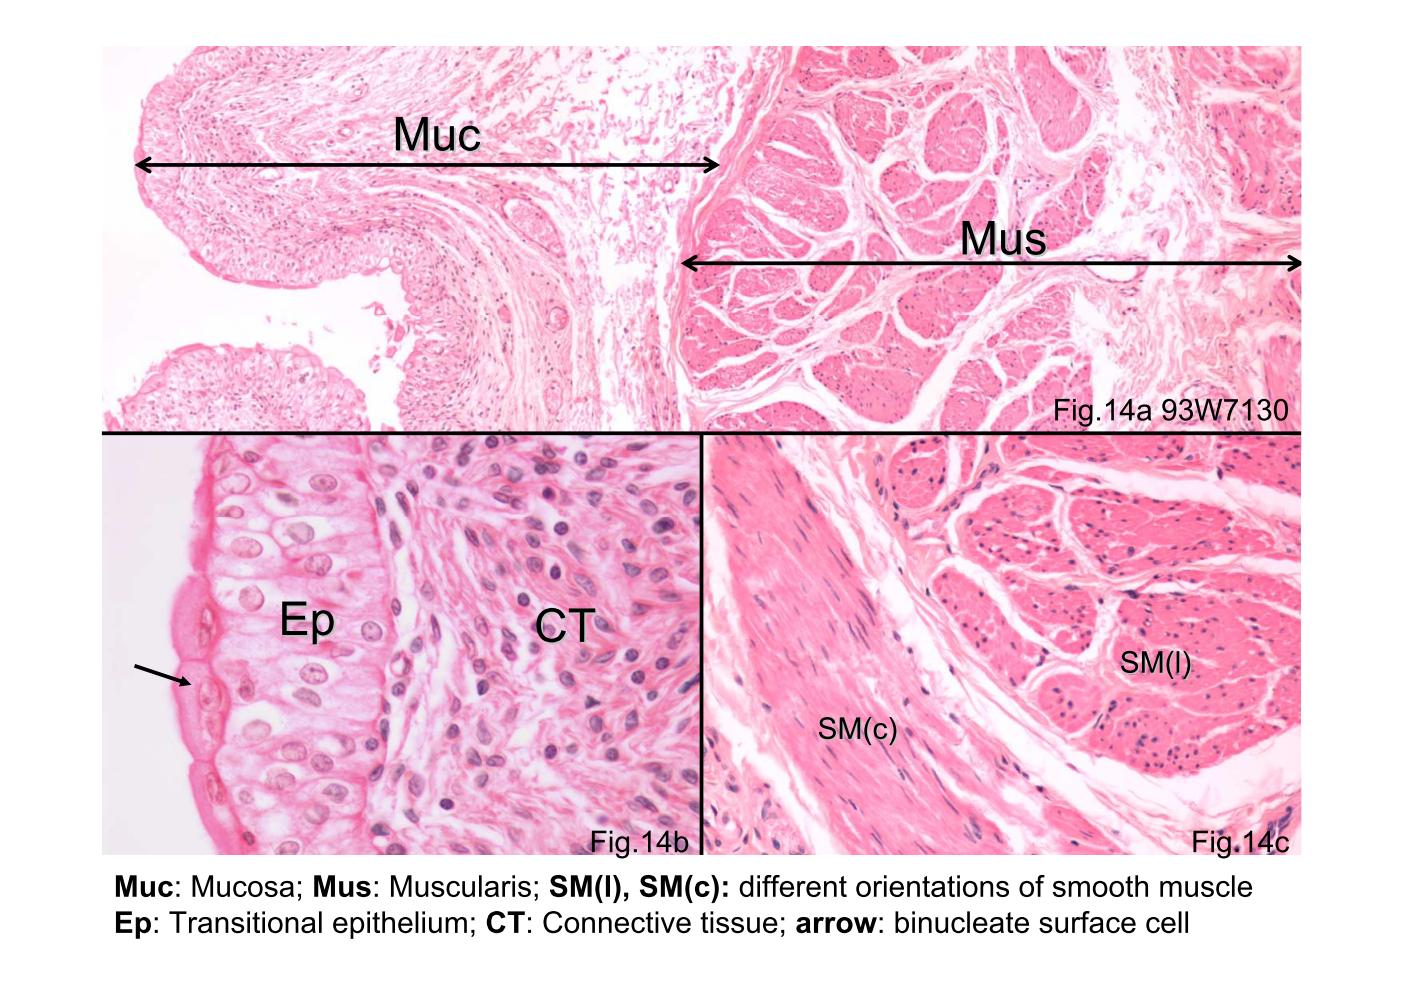 block8_25.jpg - Fig.14 93W7130, Urinary bladder human (cs), HE. Thetransitional epithelium (Ep) lining the bladder is seen on theleft. Beneath the epithelium is a relatively thick layer ofconnective tissue (CT) containing blood vessels of varioussizes. The epithelium and connective tissue constitute themucosa (Muc) of the bladder. The transitional epithelium isoften characterized by the presence of surface cells thatexhibit a "dome" shape. In addition, many of these surfacecells are binucleate (arrows). The muscularis (Mus) consistsof smooth muscle arranged as an inner longitudinal layer, amiddle circular layer, and an outer longitudinal layer, but it isless regularly arranged than the description indicates.